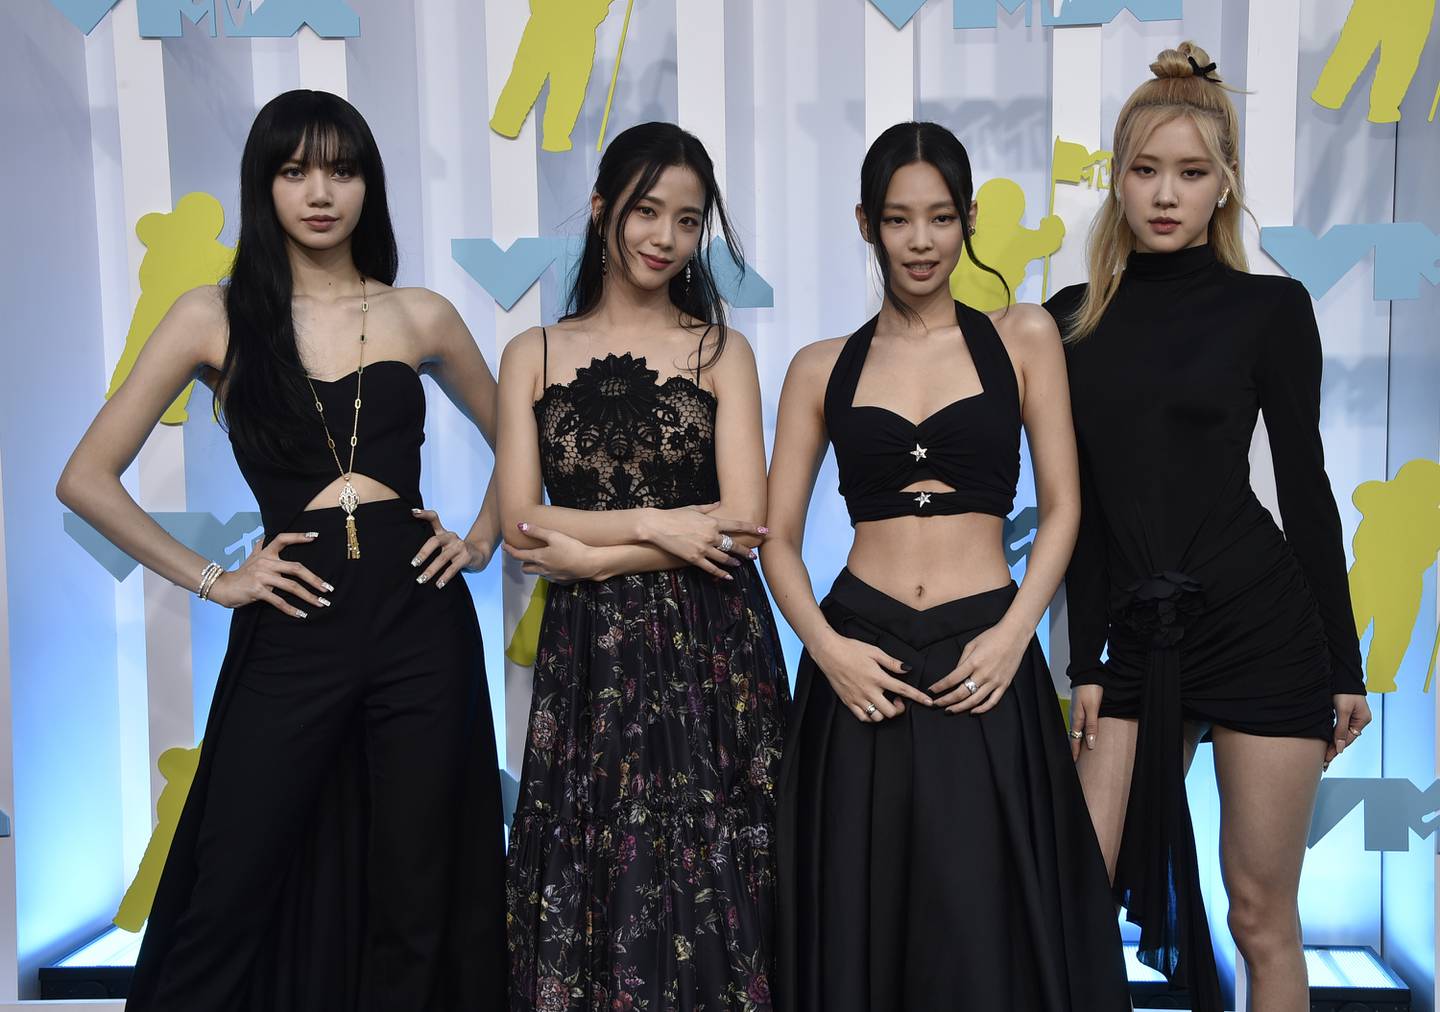 Blackpink, from left, Lisa, Jisoo, Jennie and Rose, arrive at the MTV Video Music Awards. Invision / AP